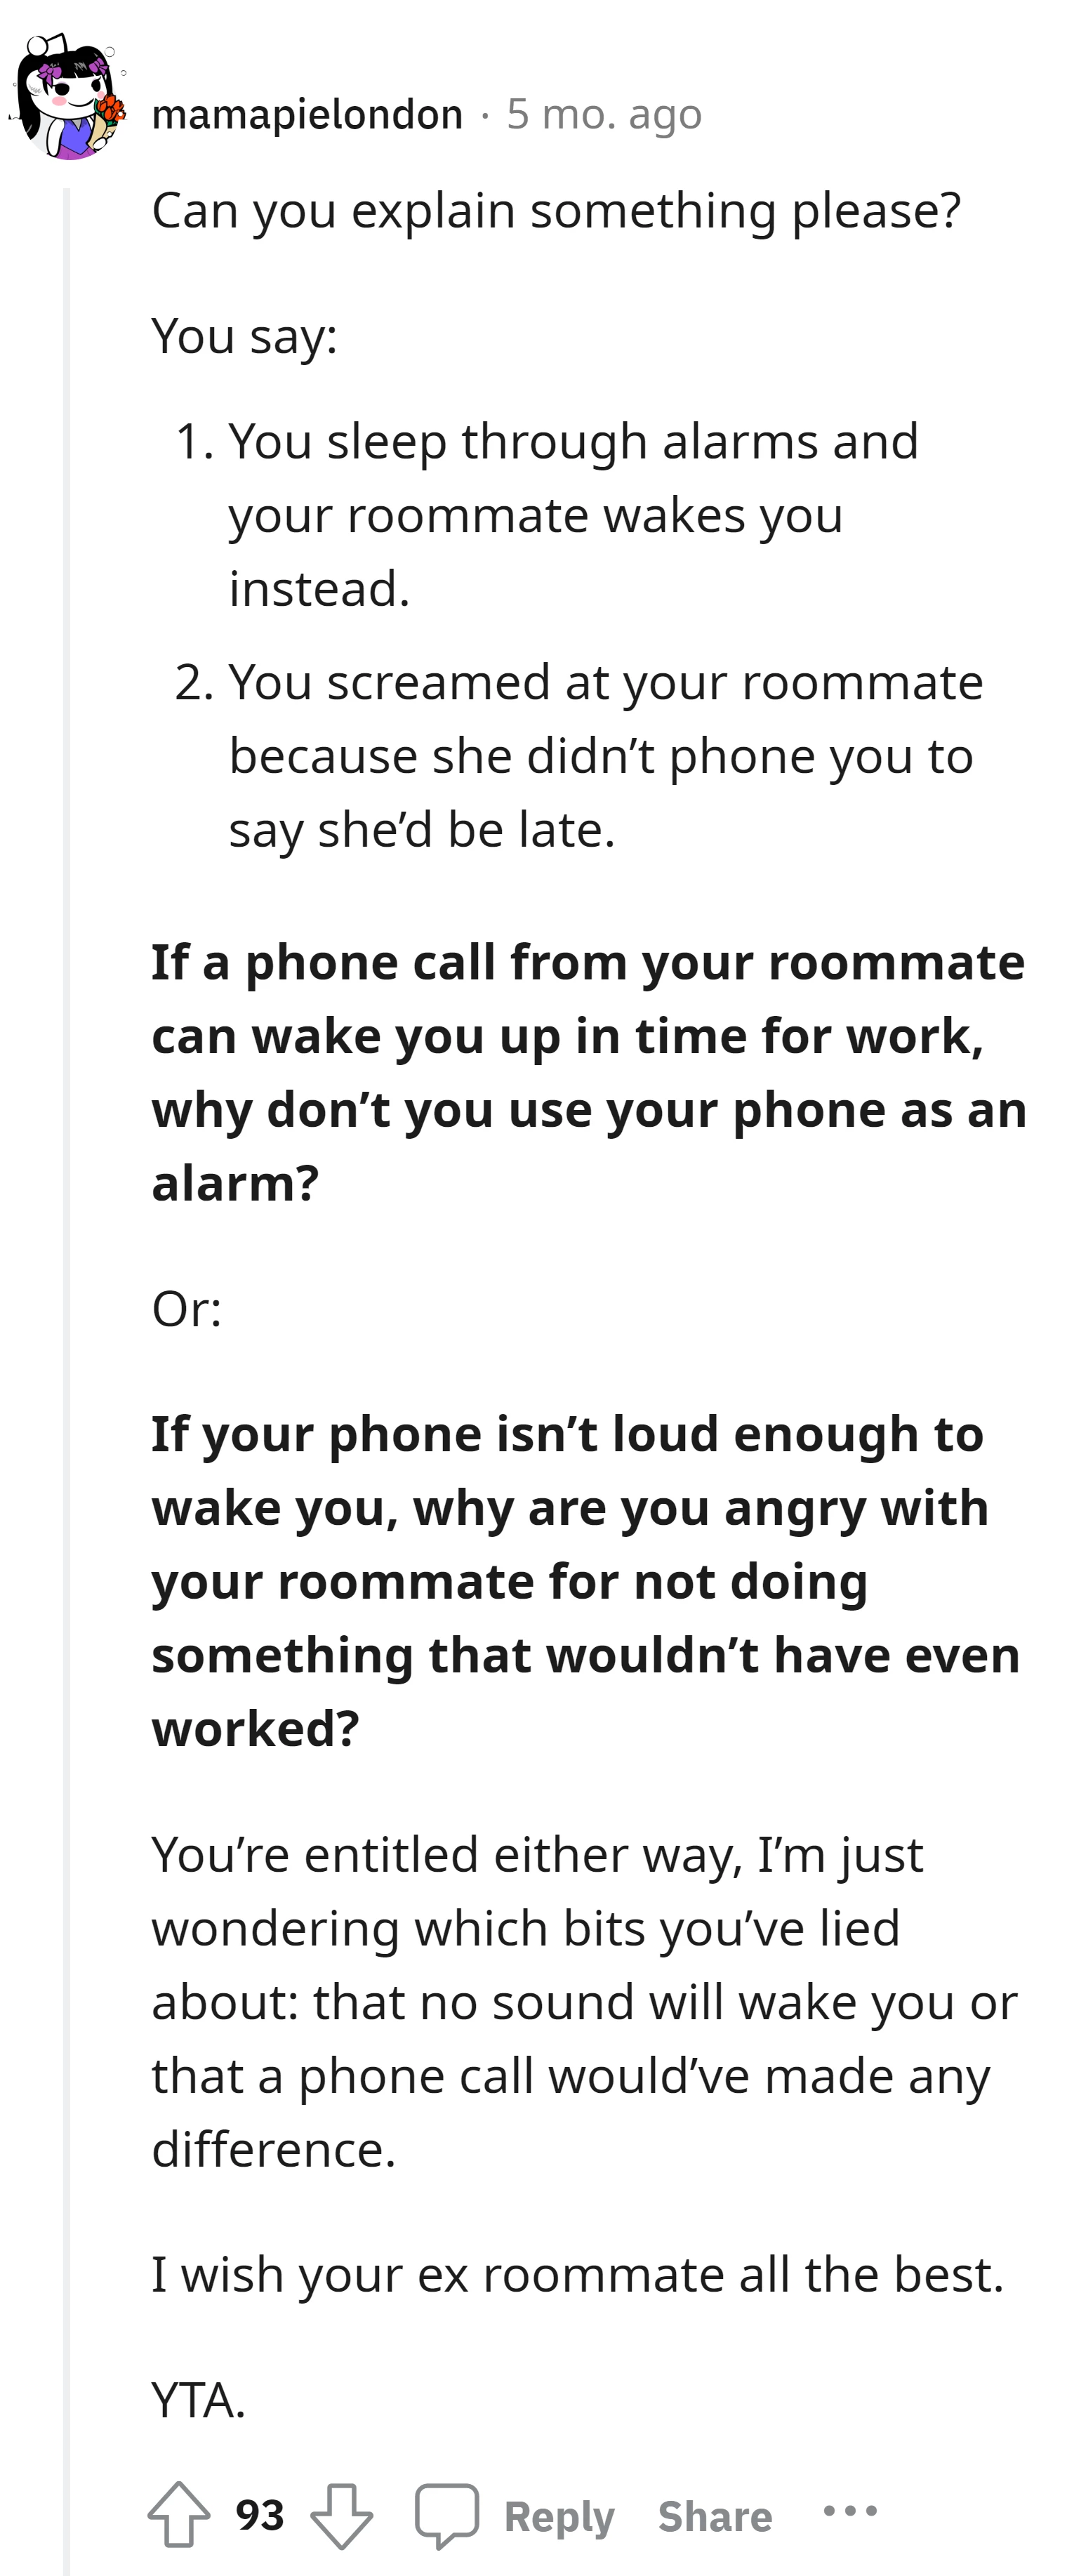 "If a phone call from your roommate can wake you up in time for work, why don’t you use your phone as an alarm?"